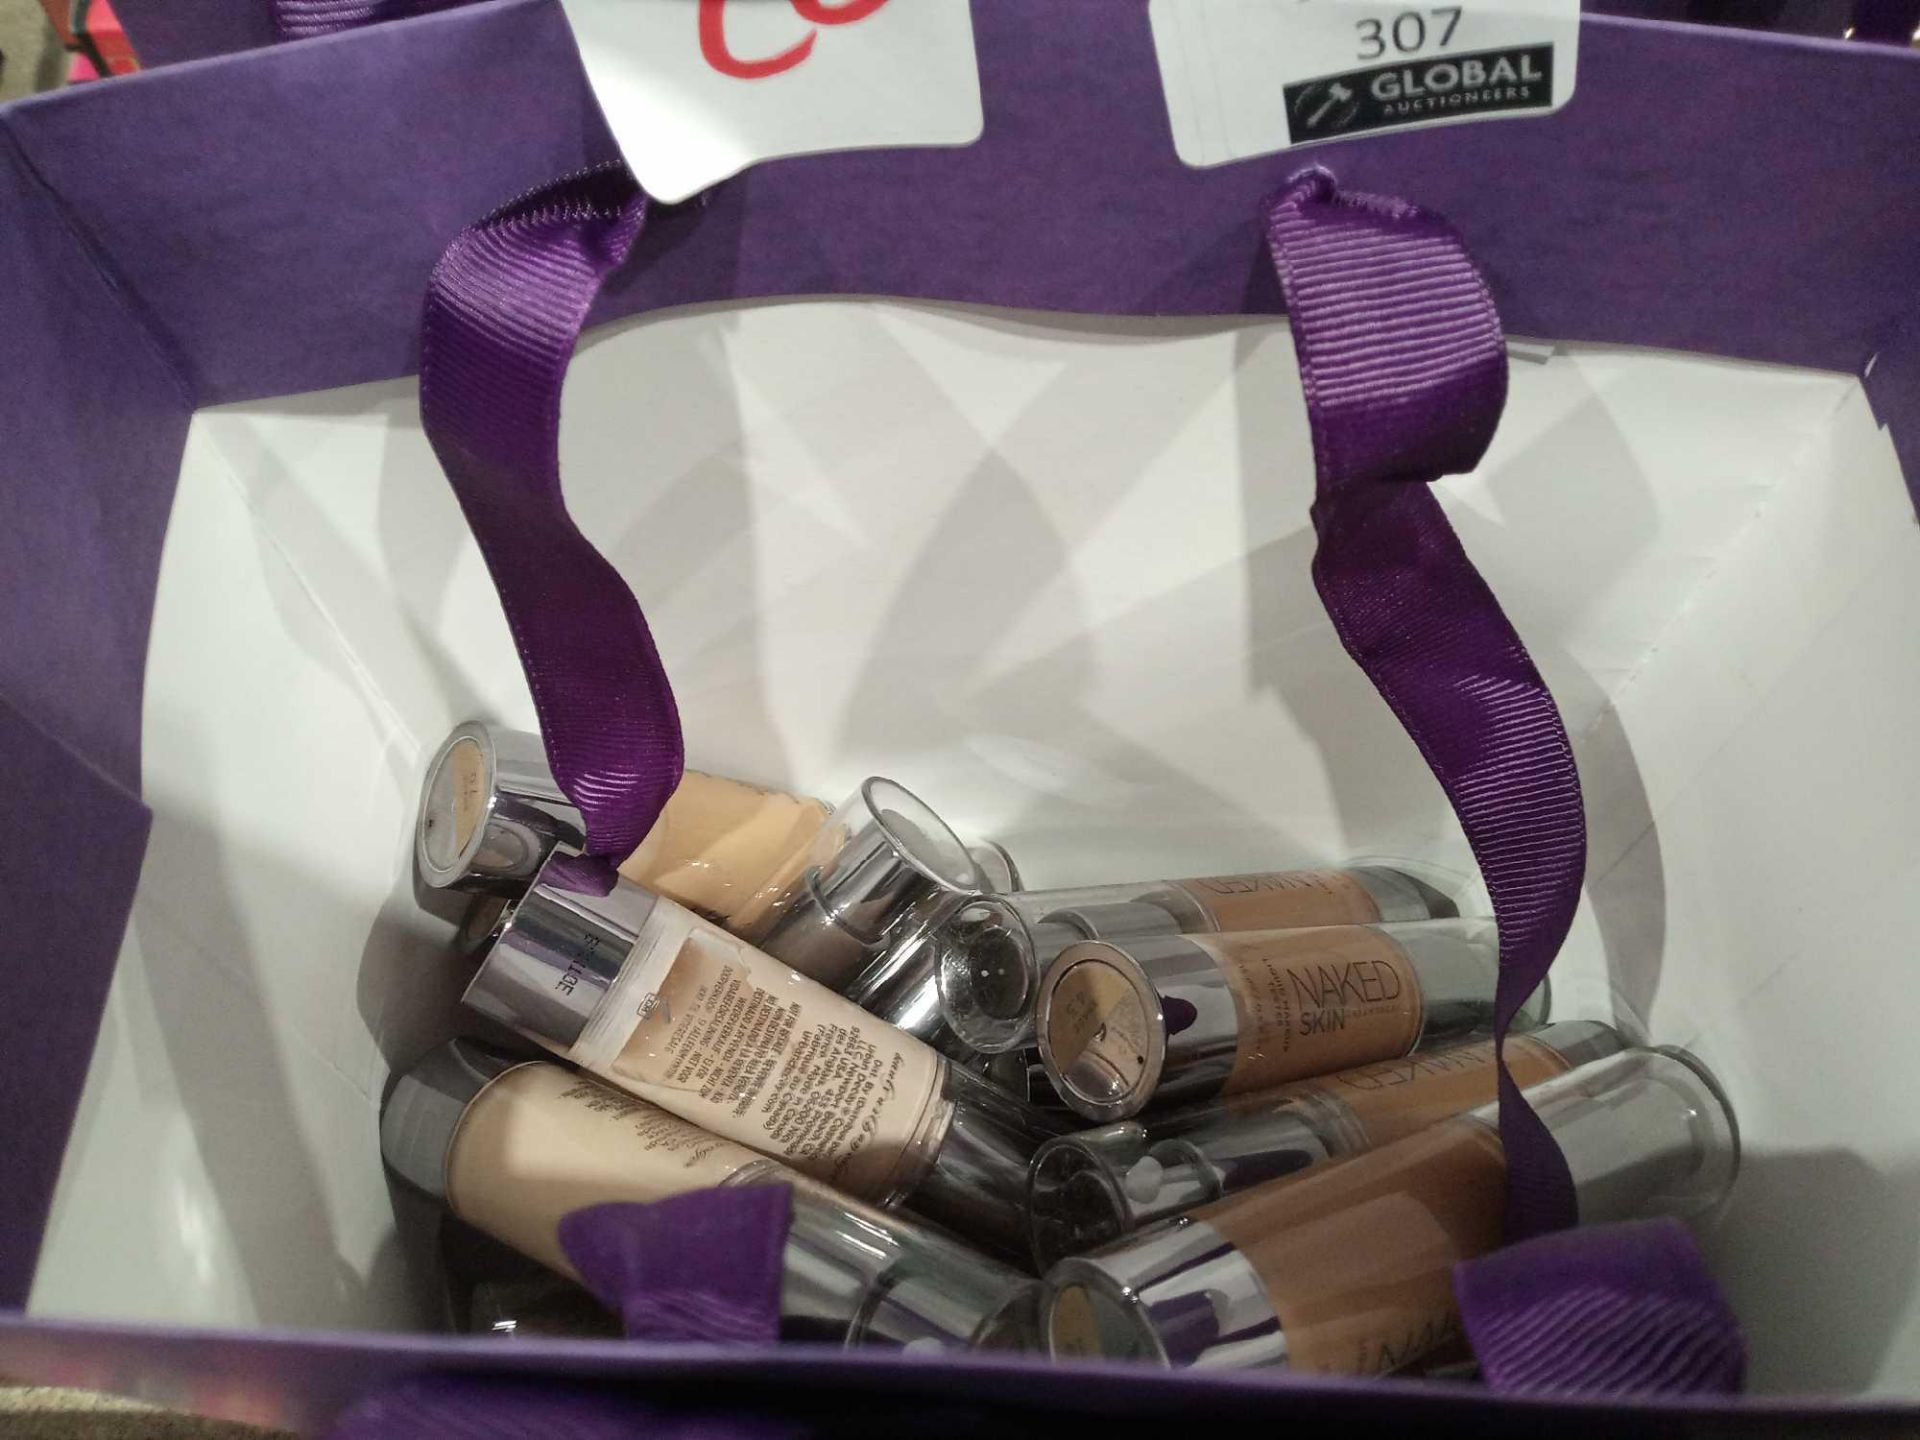 RRP £¬£250 Urban Decay Gift Bag To Contain 20 Naked Skin Liquid Makeup Foundations 15 Mil Ex Display